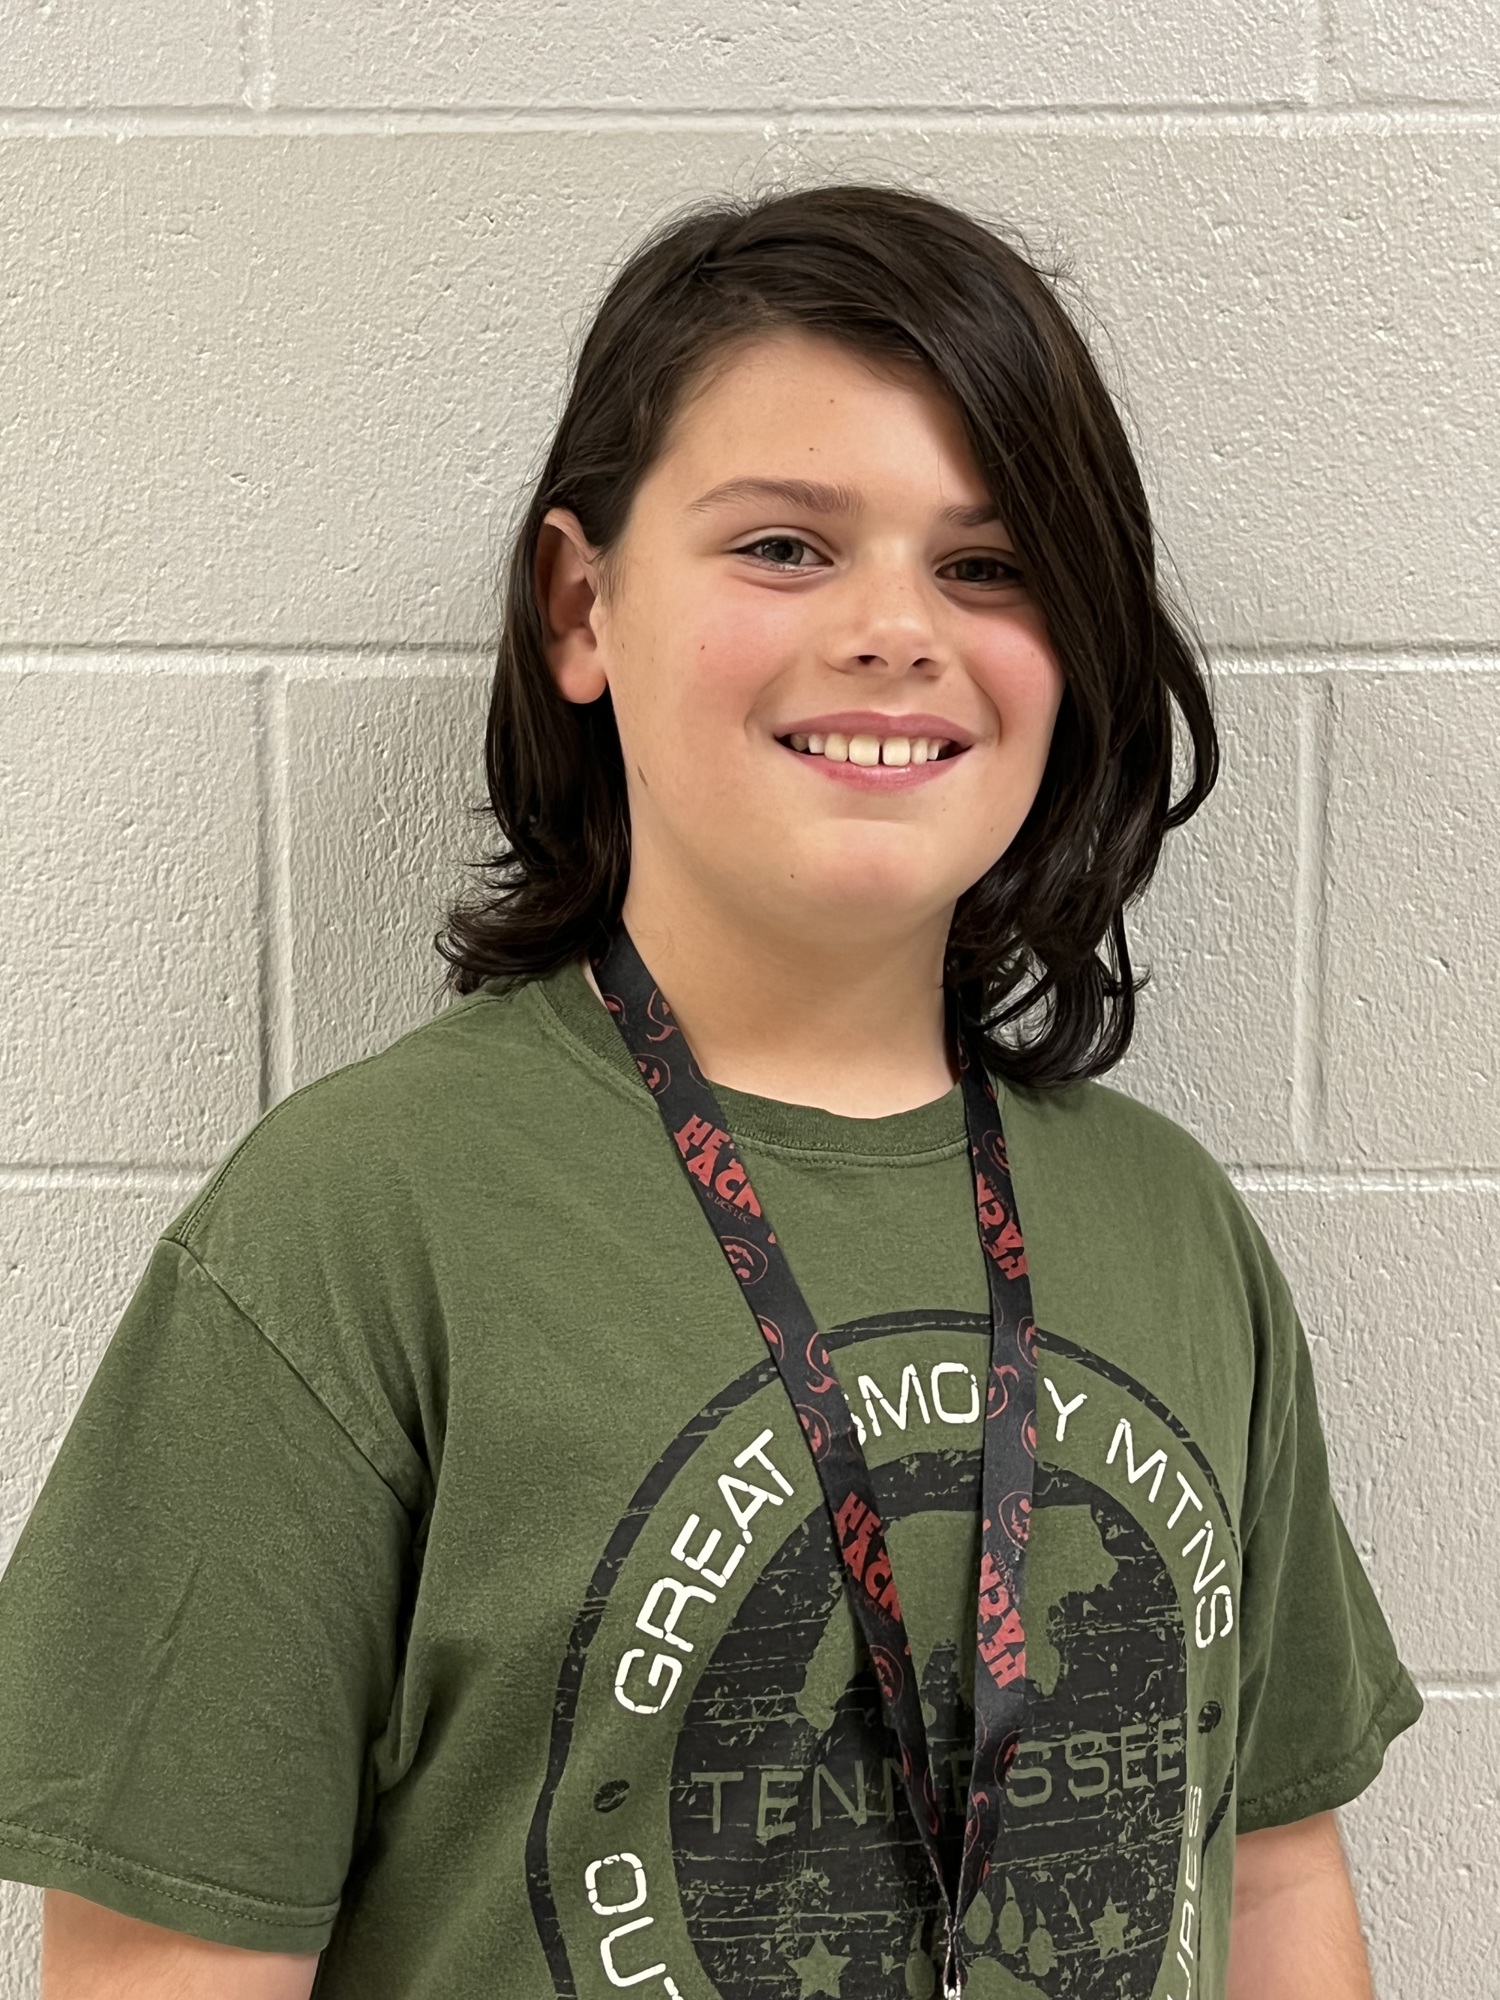 Ethan Conner, a Freedom Elementary School fourth grader, wants to follow in his family's footsteps by joining the family business, CRC Technologies.